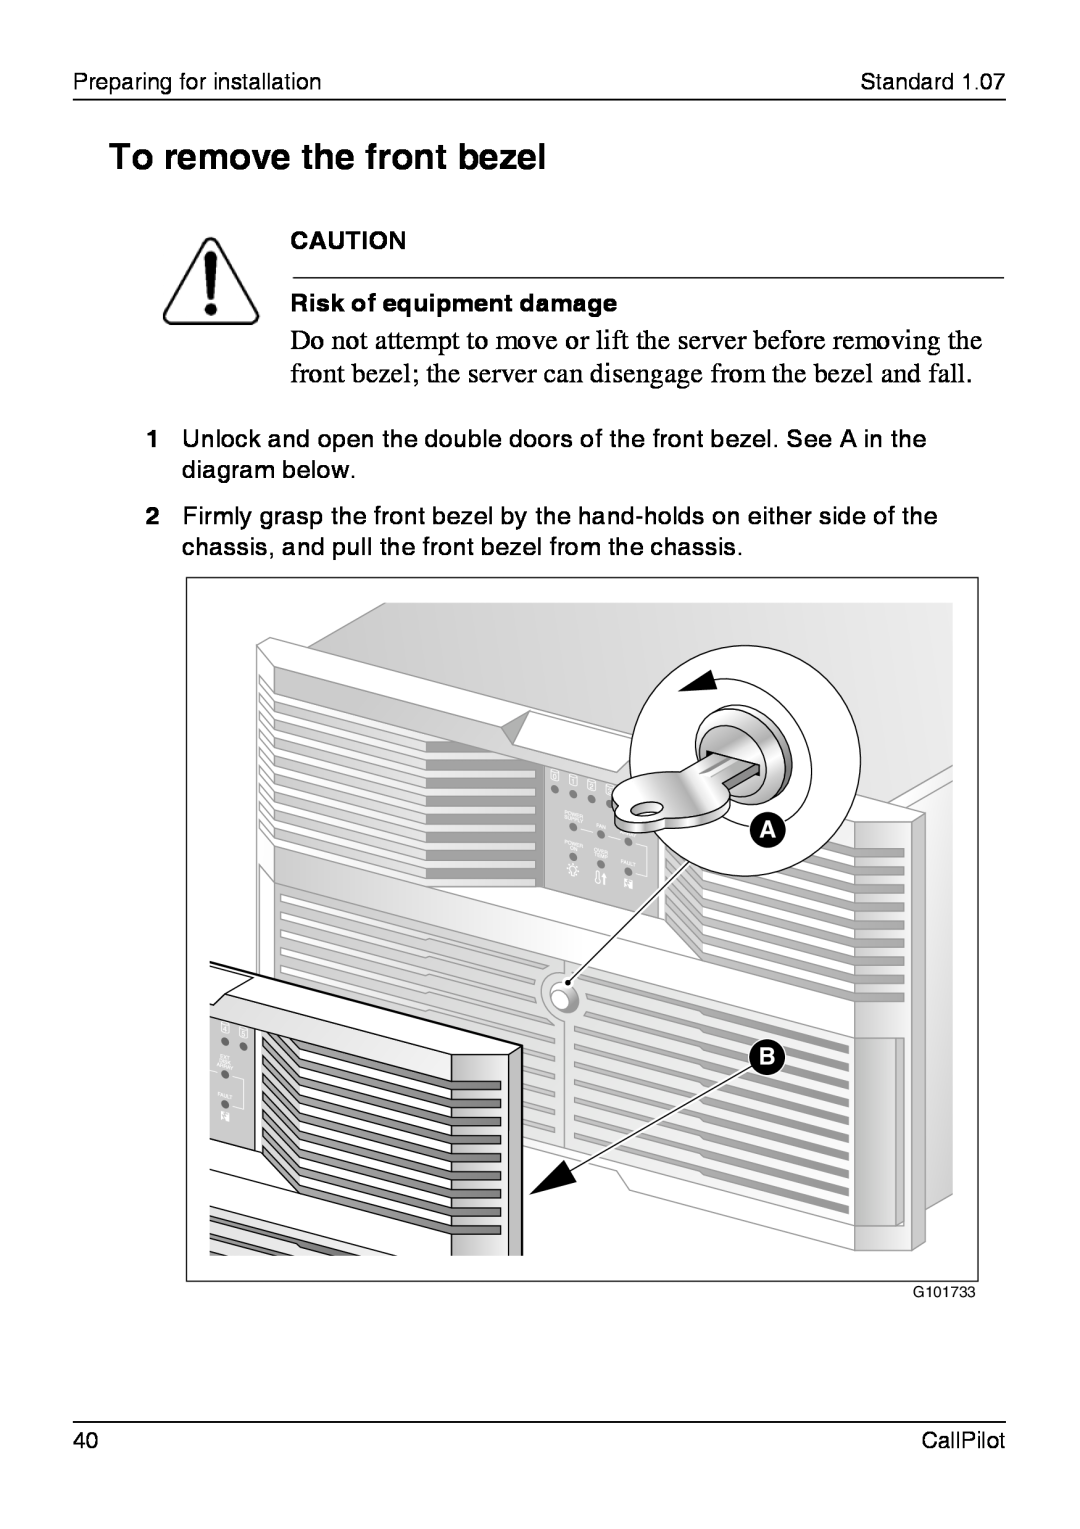 Nortel Networks 1002rp manual To remove the front bezel, Risk of equipment damage 